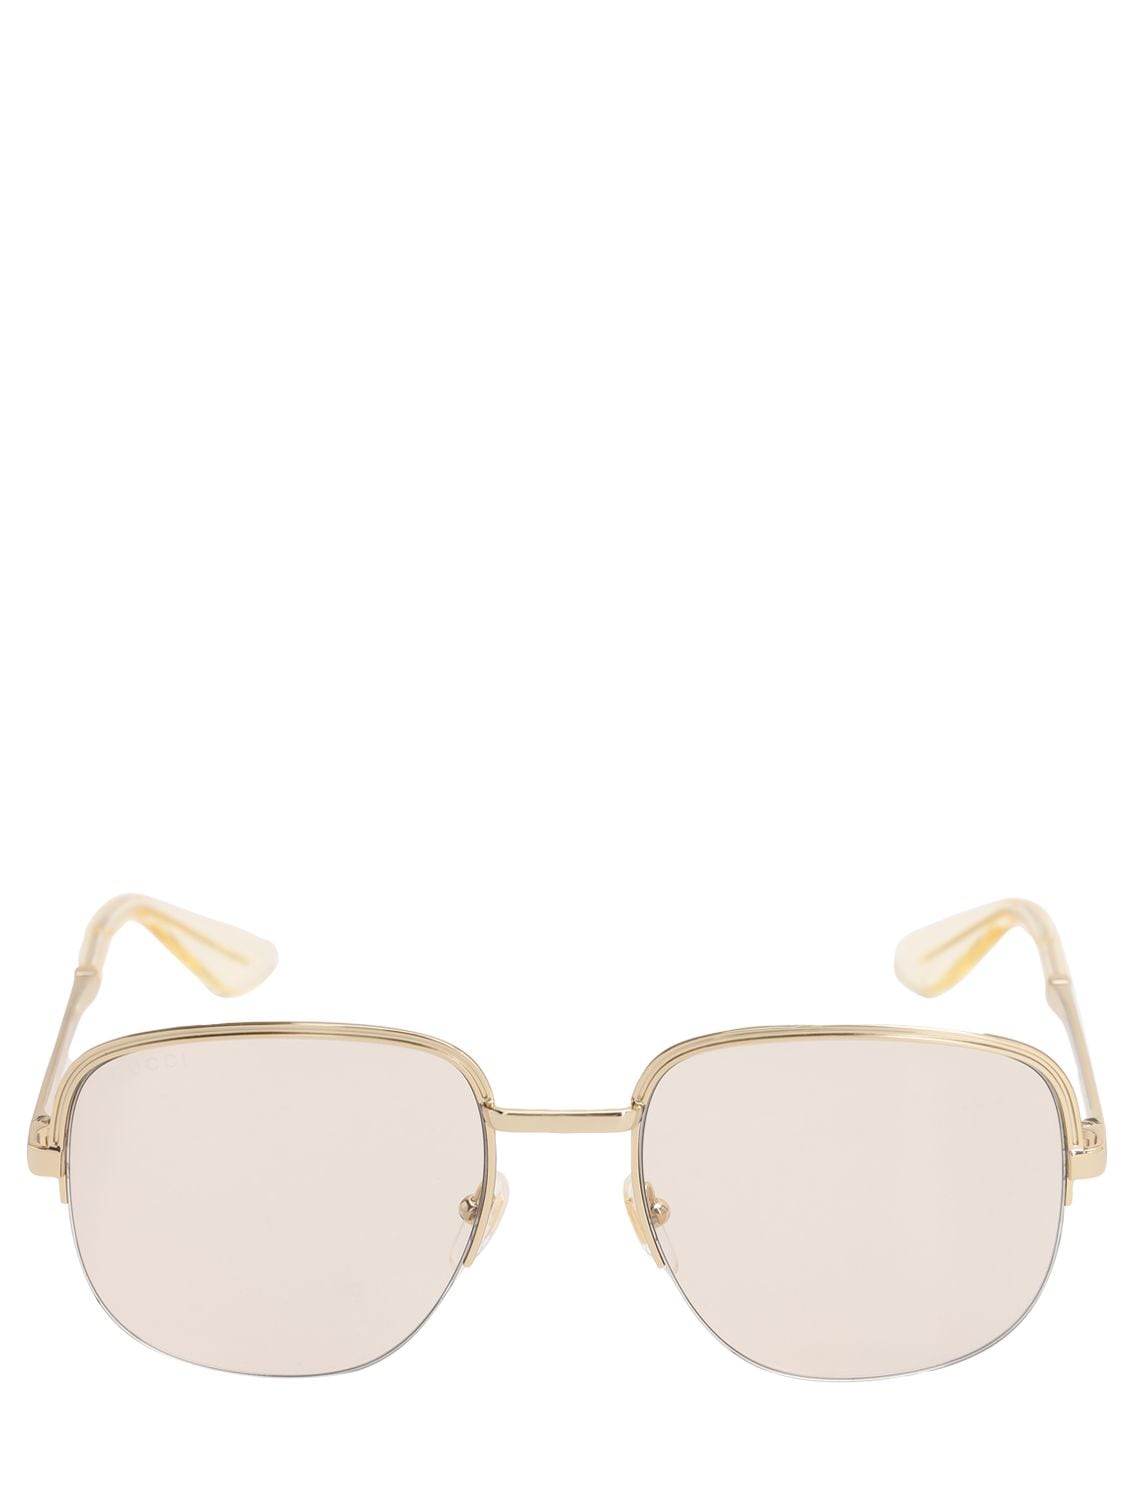 Gucci Round Glasses W/ Clear Lenses In Gold